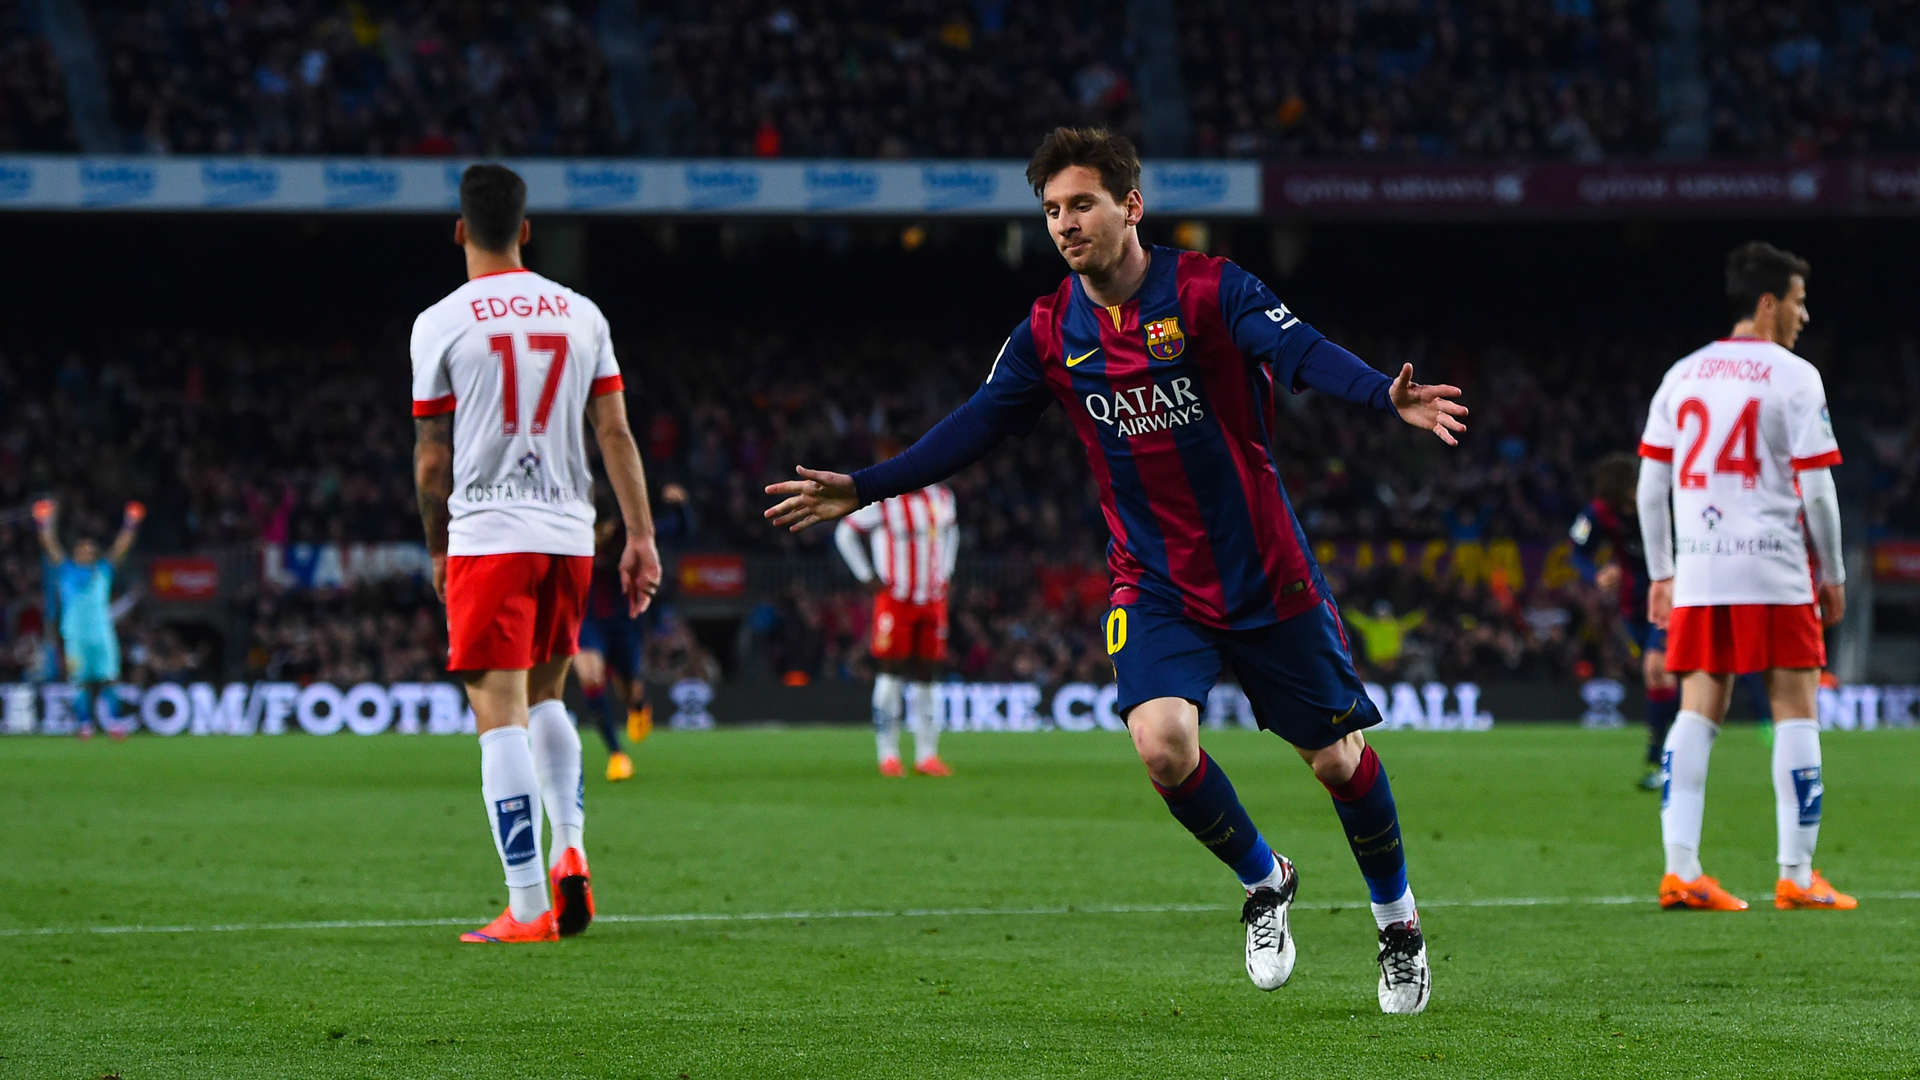 Messi curler opens the scoring for Barca